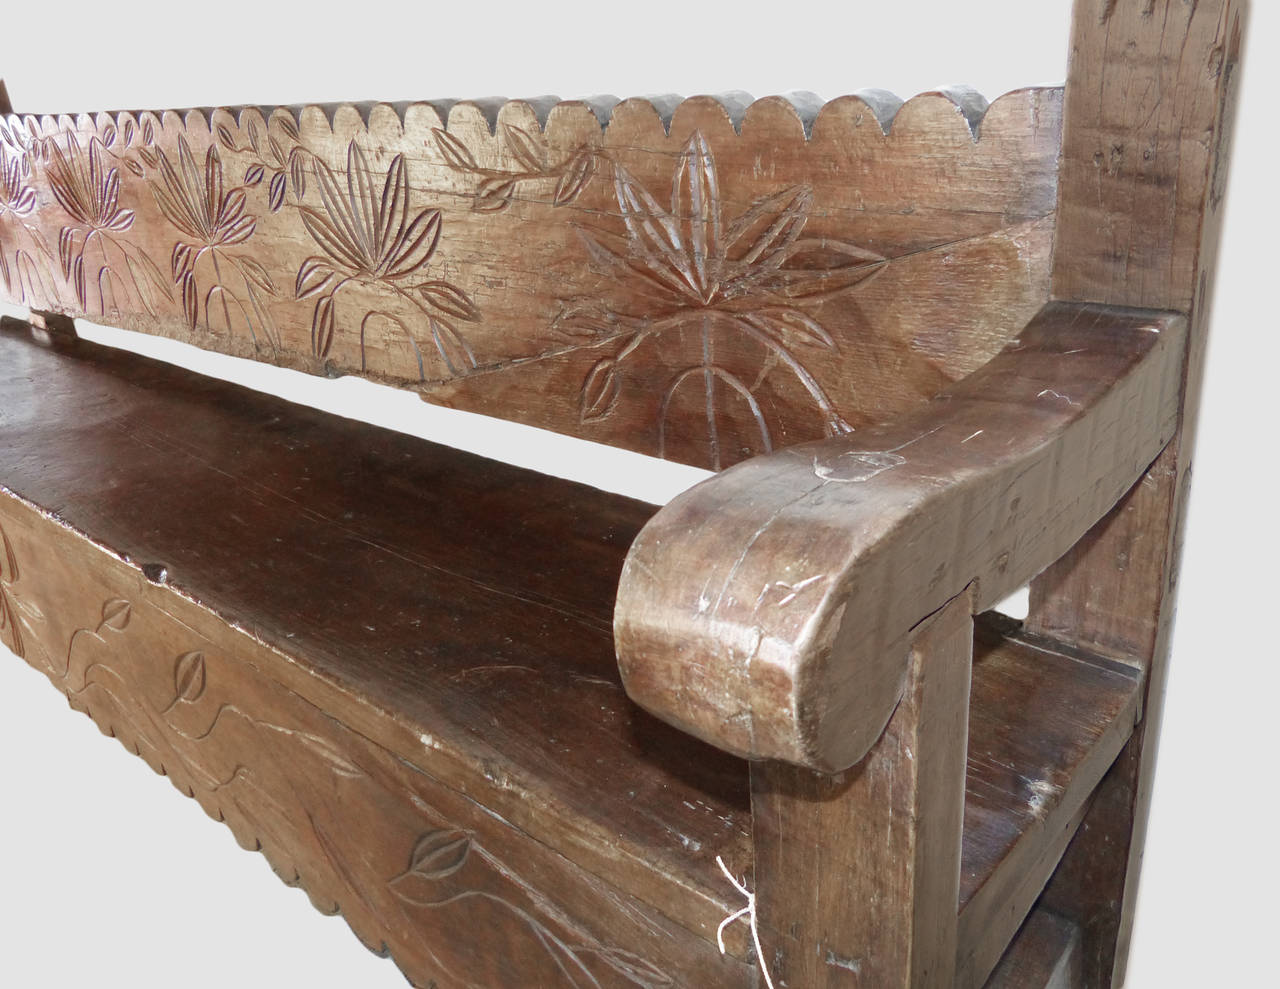 This wonderful large bench is made of hardwood and features scalloped edges along the back and front apron, as well as sinuous floral carving. Heavy curved armrests complete the piece. Perfect for a long hallway or under a portal for the perfect